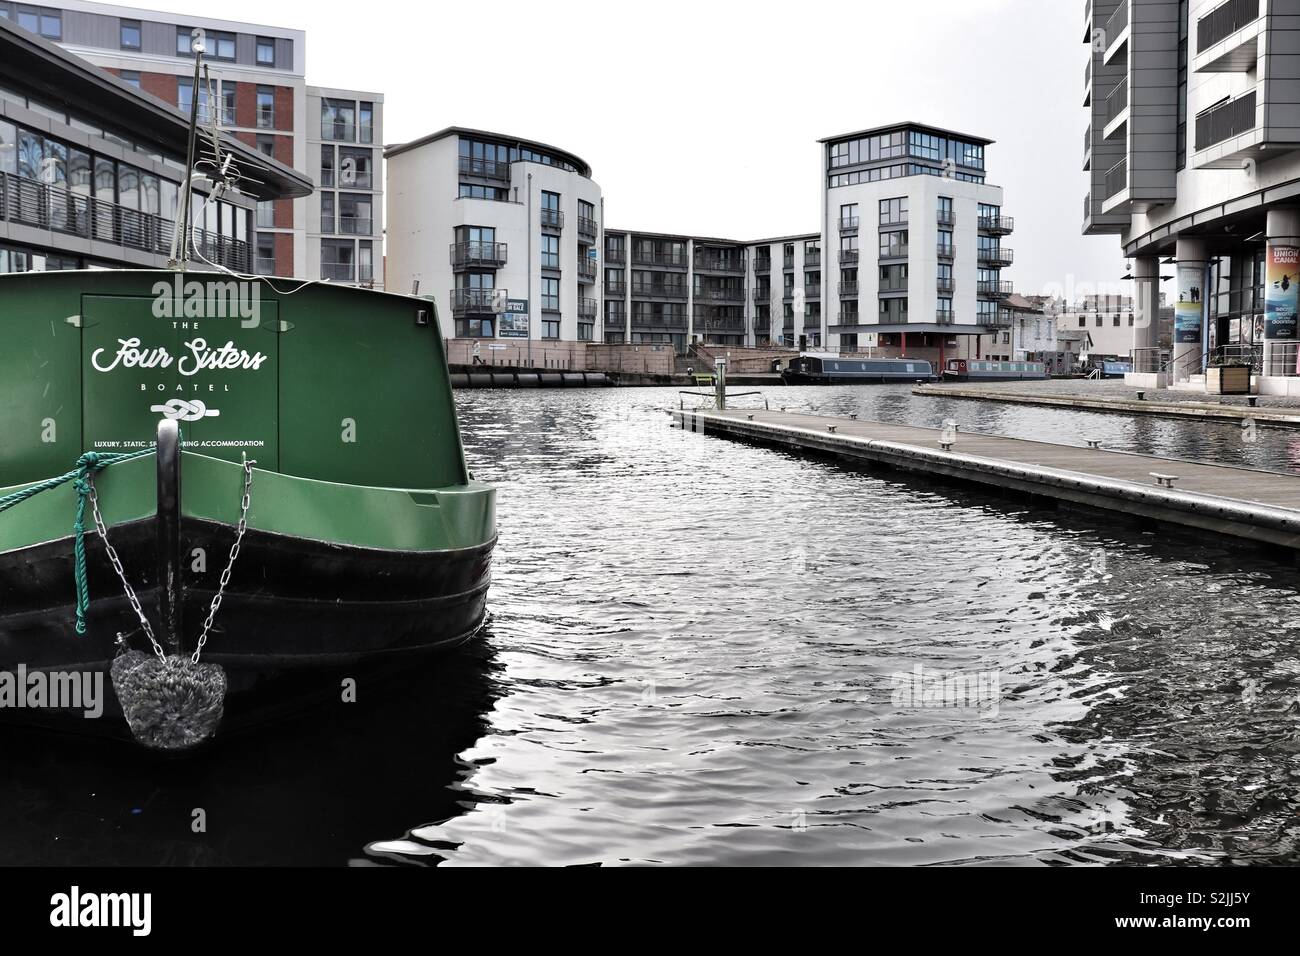 Canal barge moored at Edinburgh Quay with surrounding architecture Stock Photo